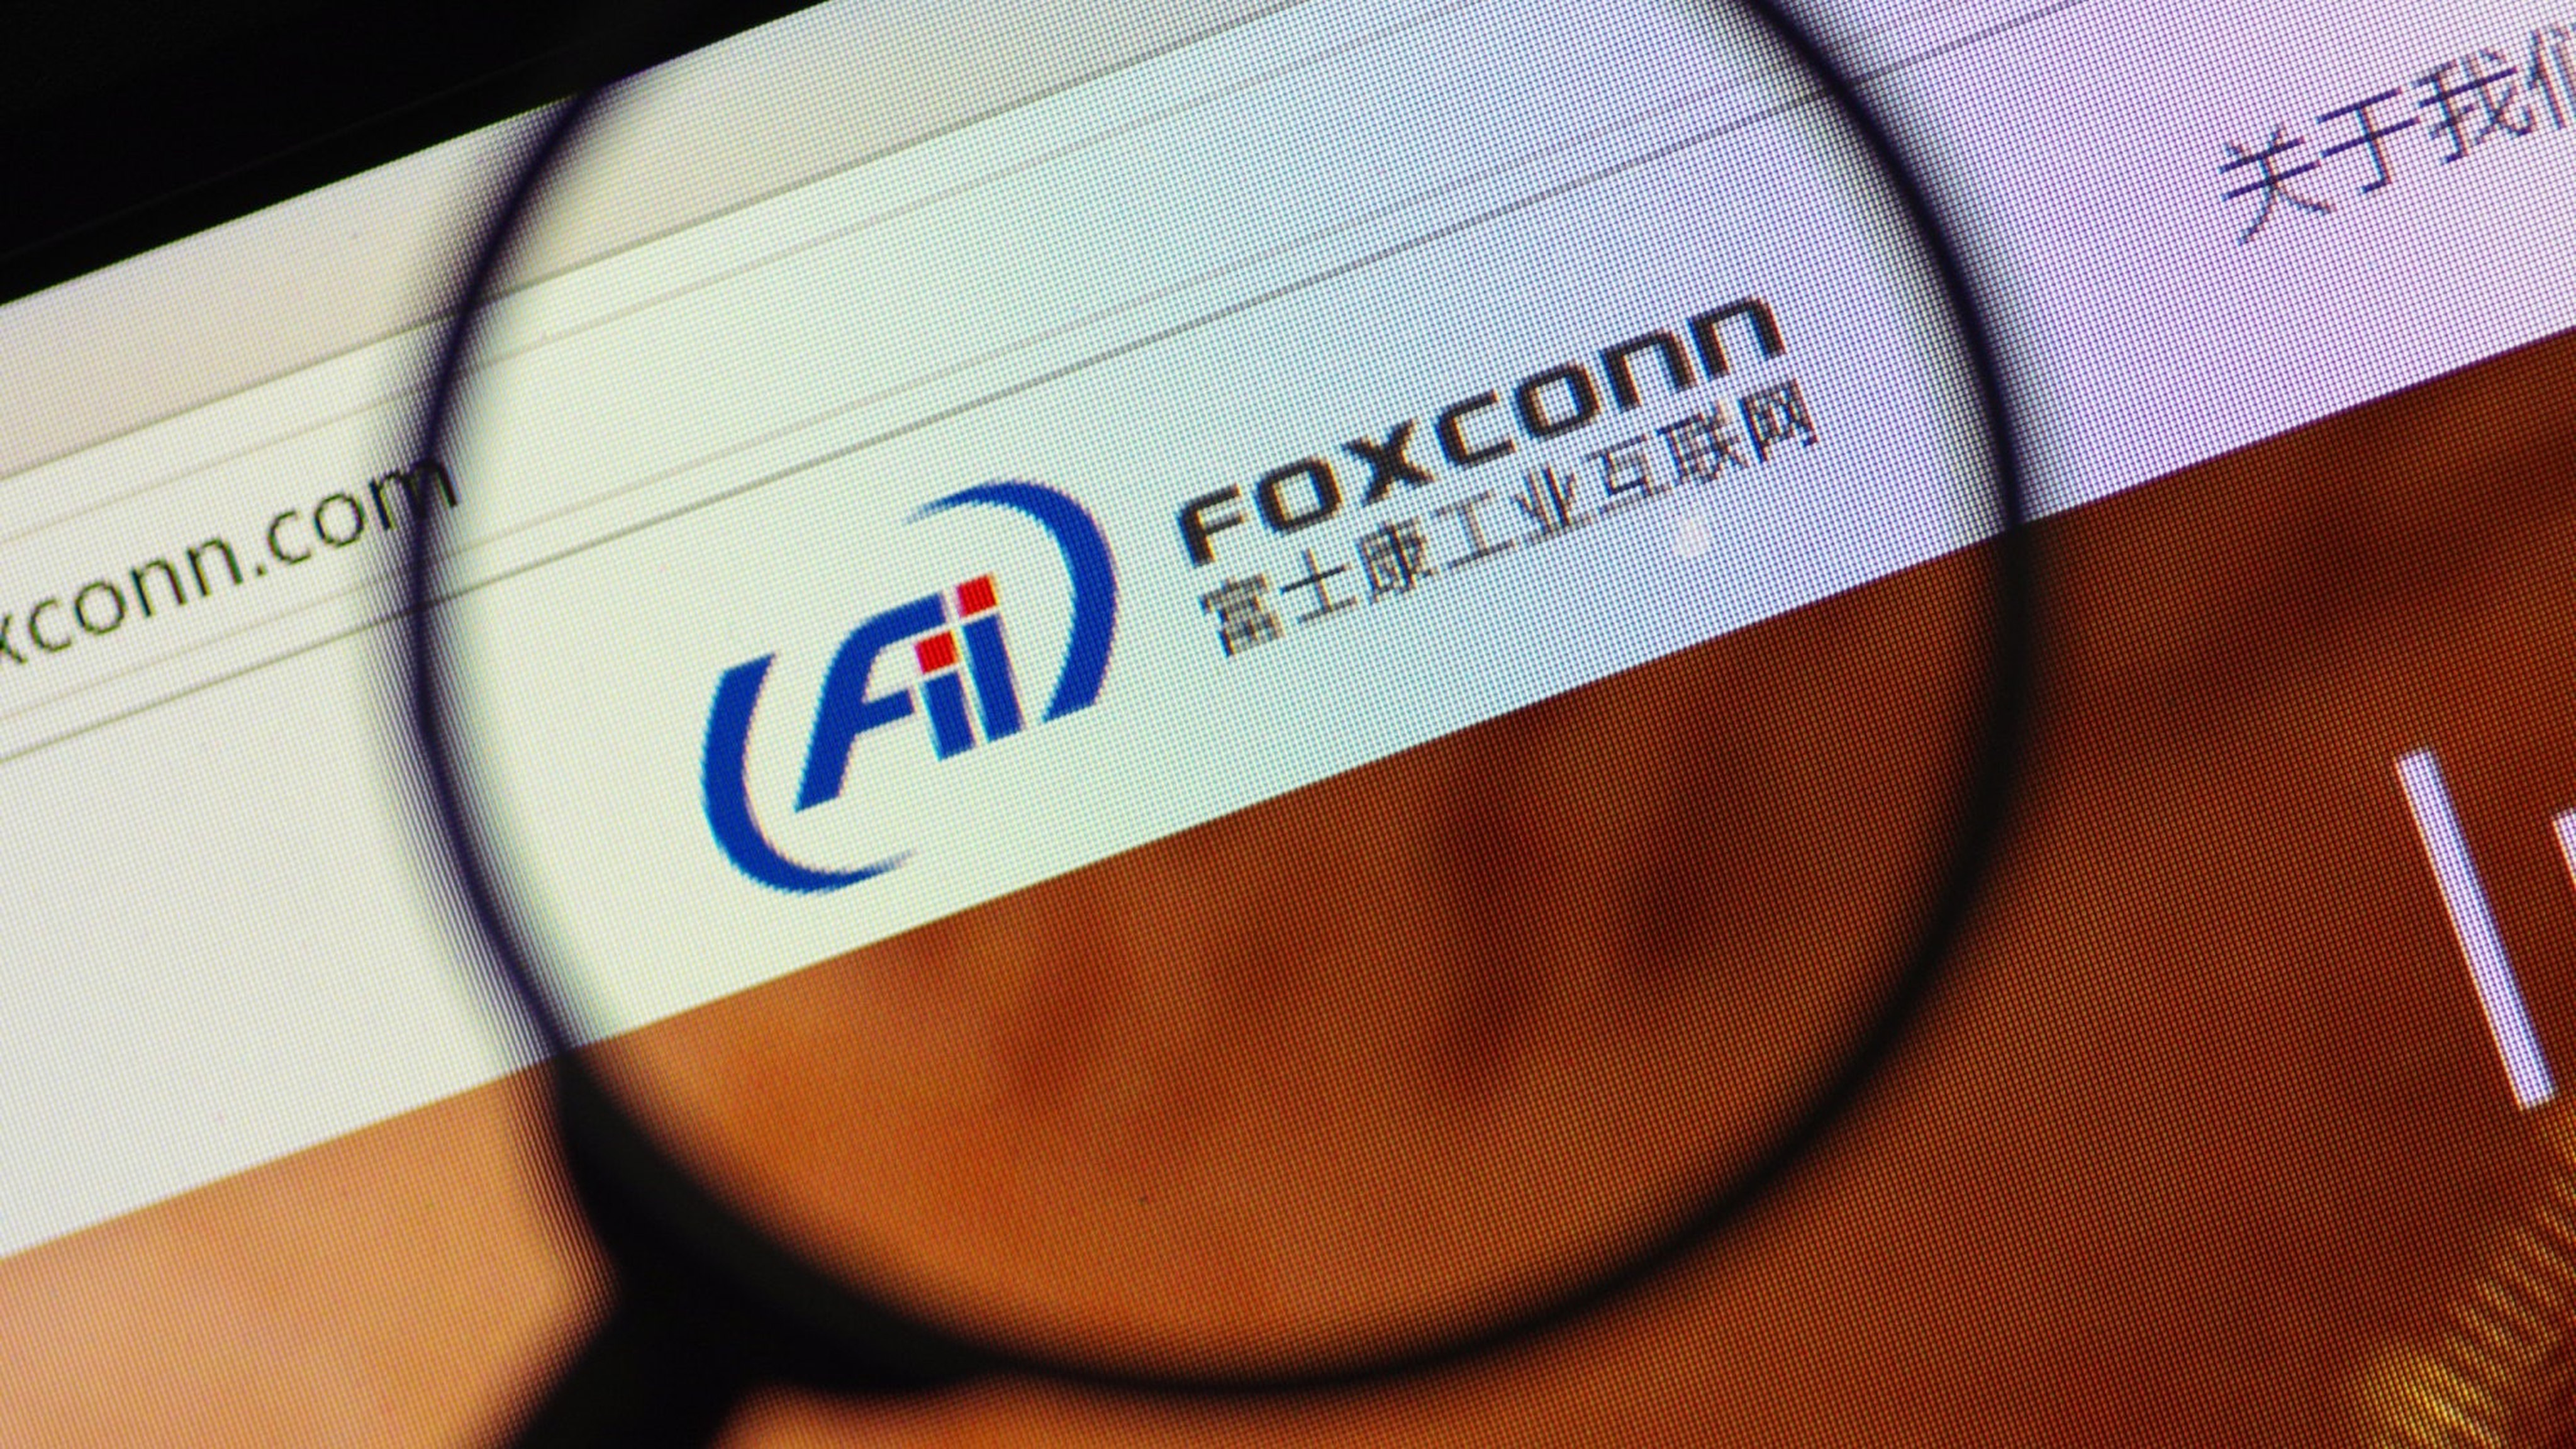 Headquartered in Shenzhen, Foxconn Industrial Internet is an international supplier of servers and storage systems used by cloud computing services providers and large enterprises. Photo: Handout